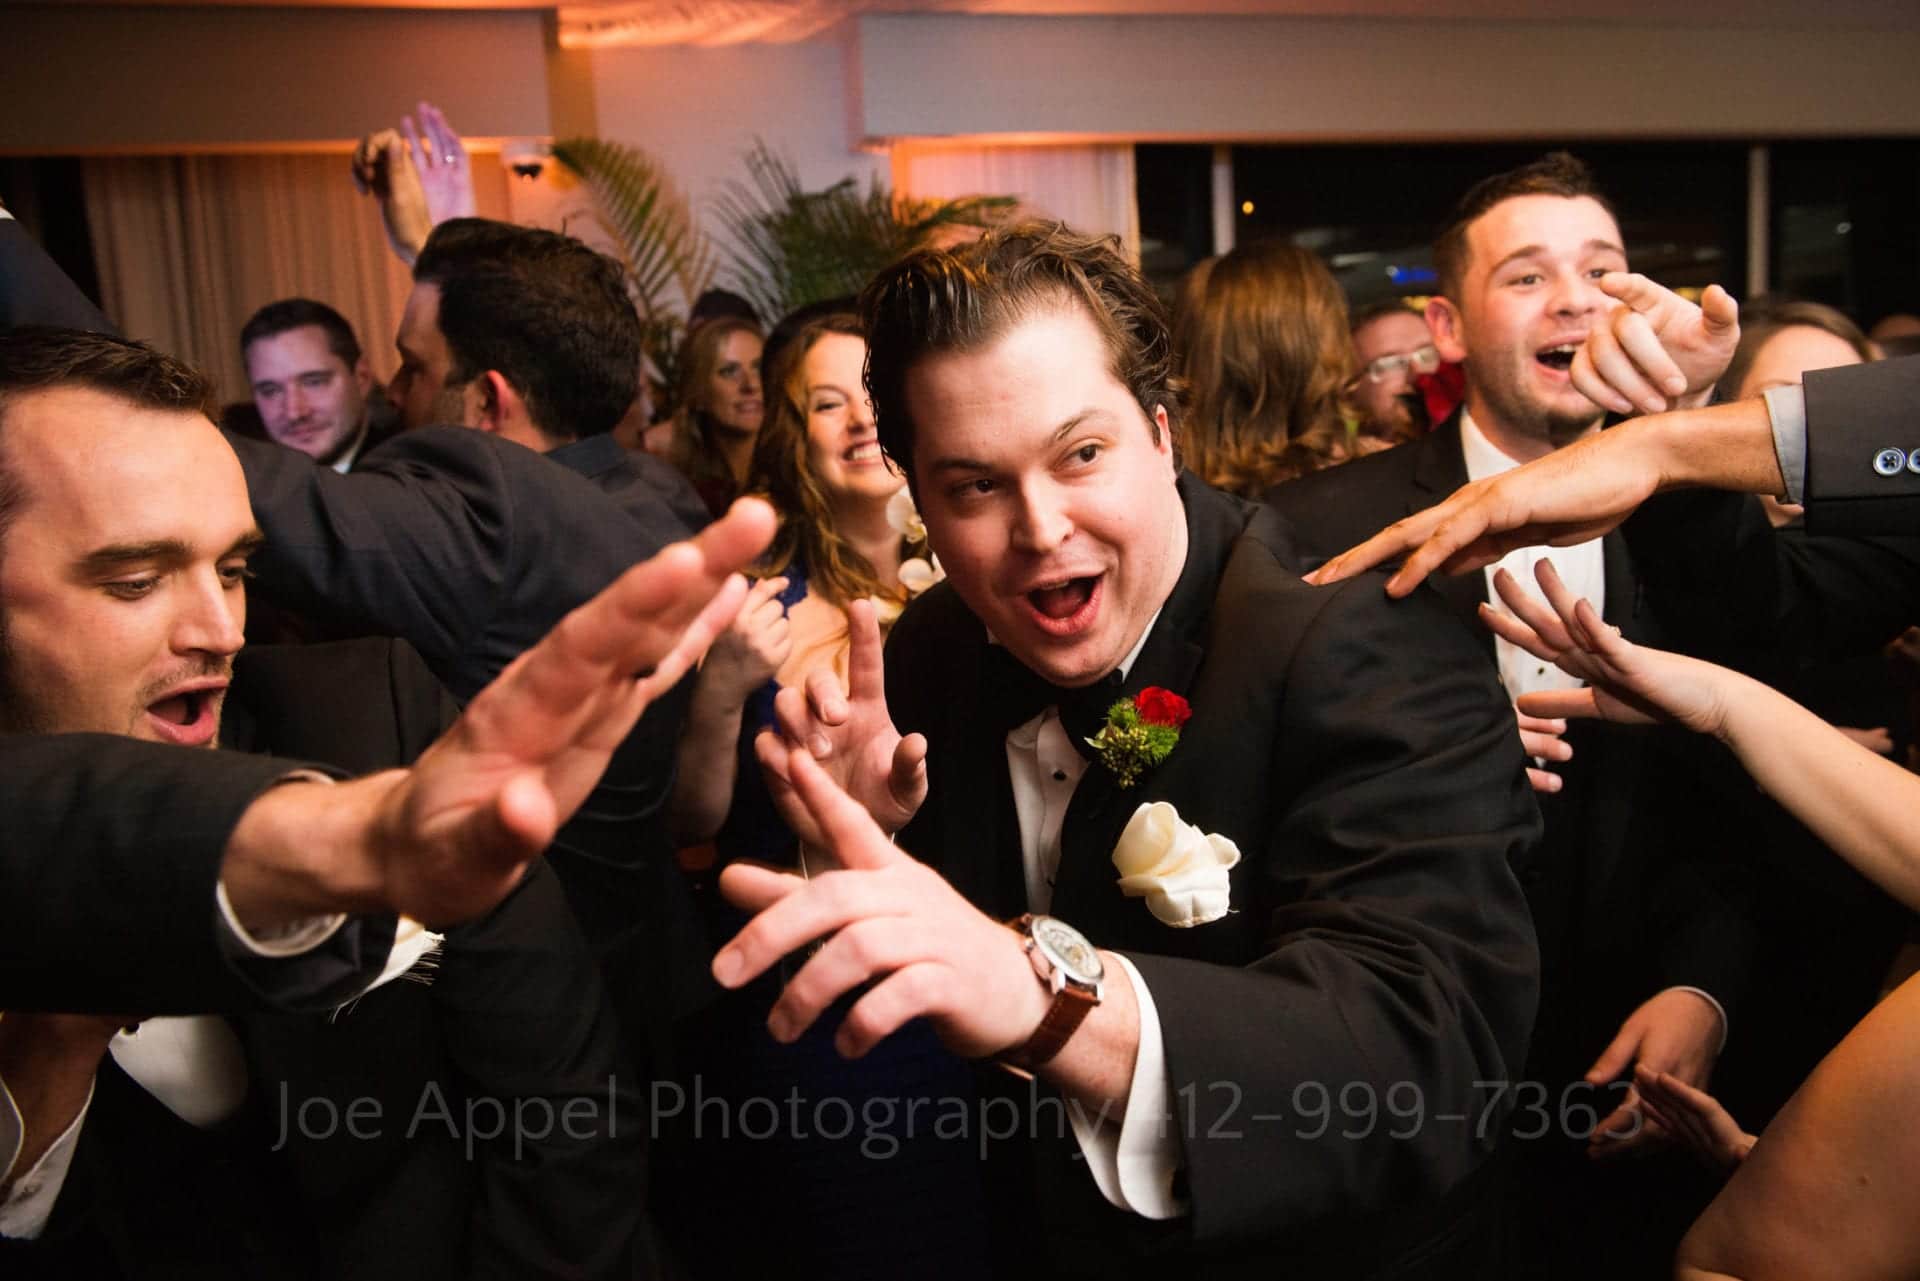 groomsmen in black and white suits sing and dance